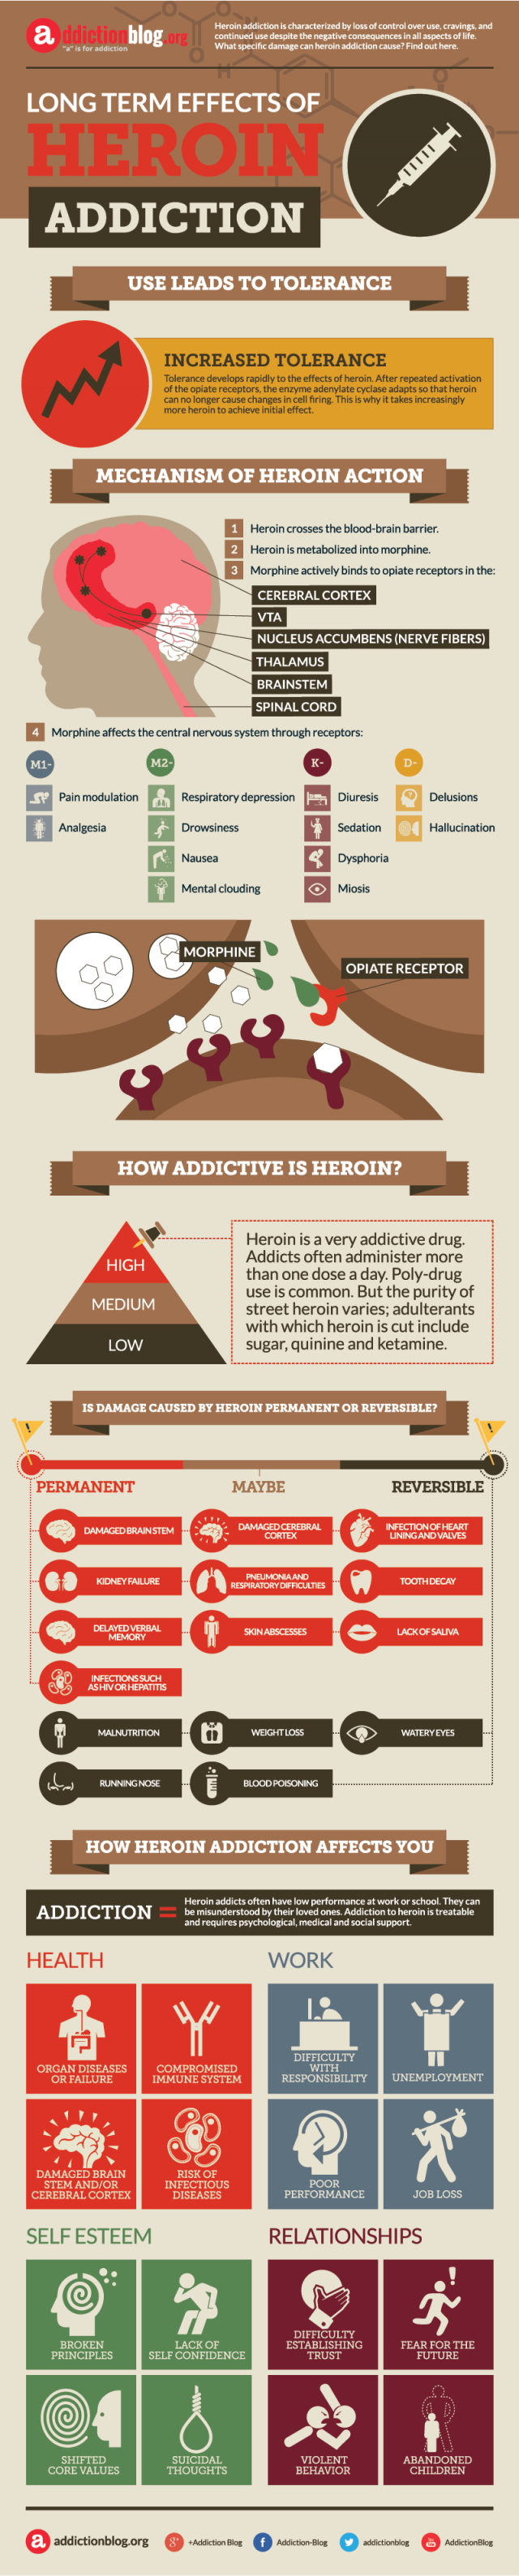 Long term effects of heroin addiction (INFOGRAPHIC)